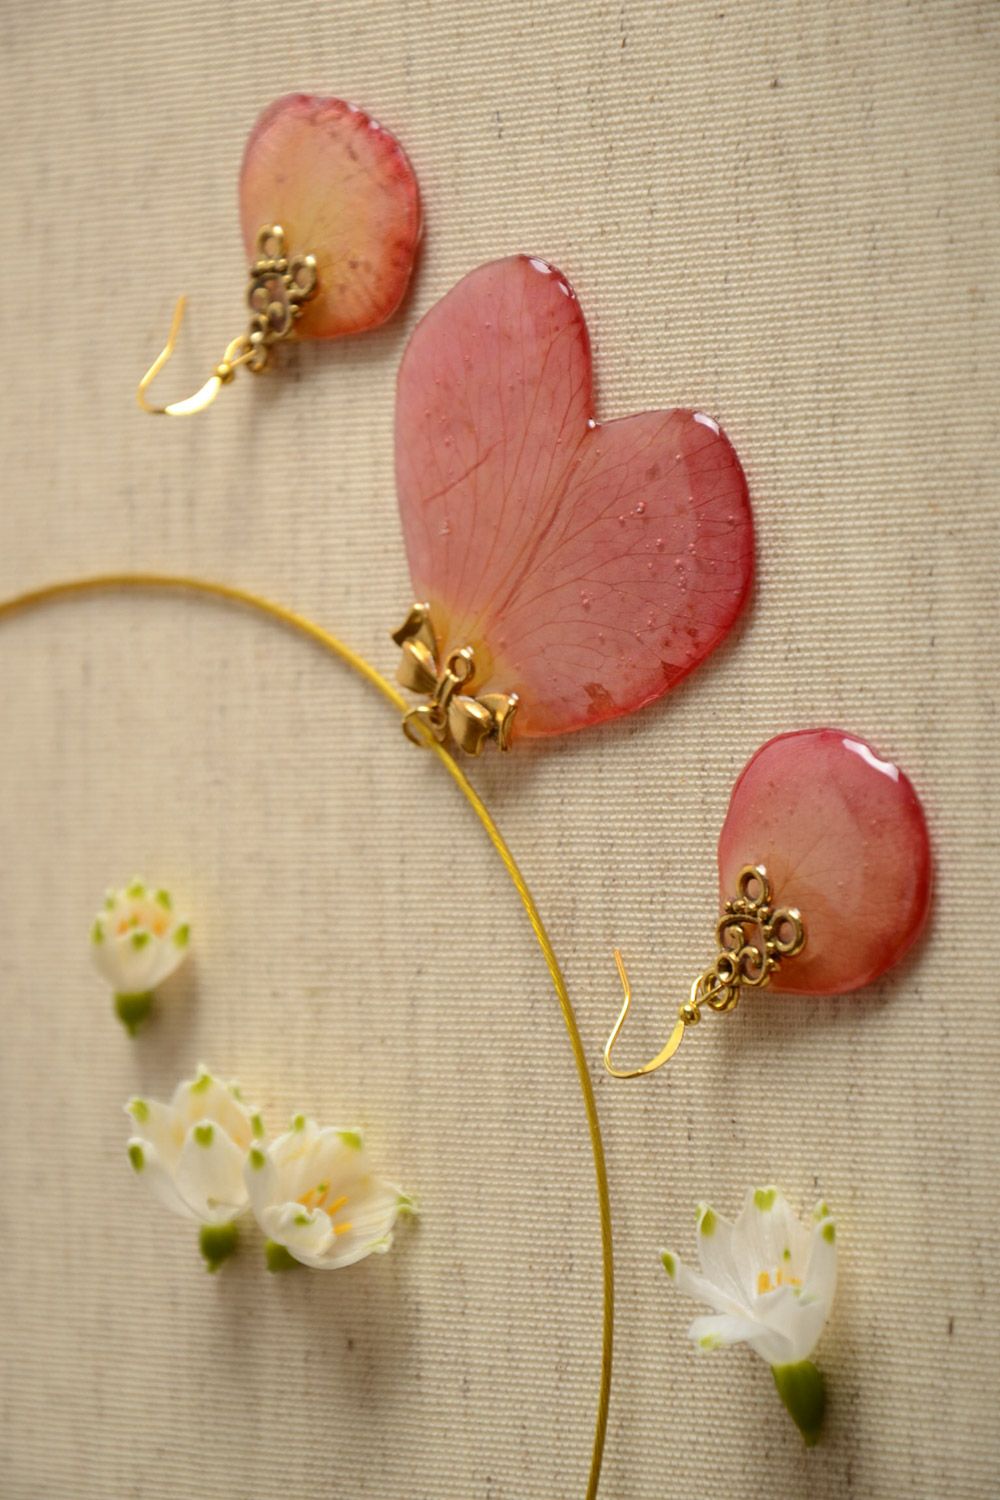 Handmade epoxy resin jewelry set 2 items botanical pendant and earrings of pink color photo 1